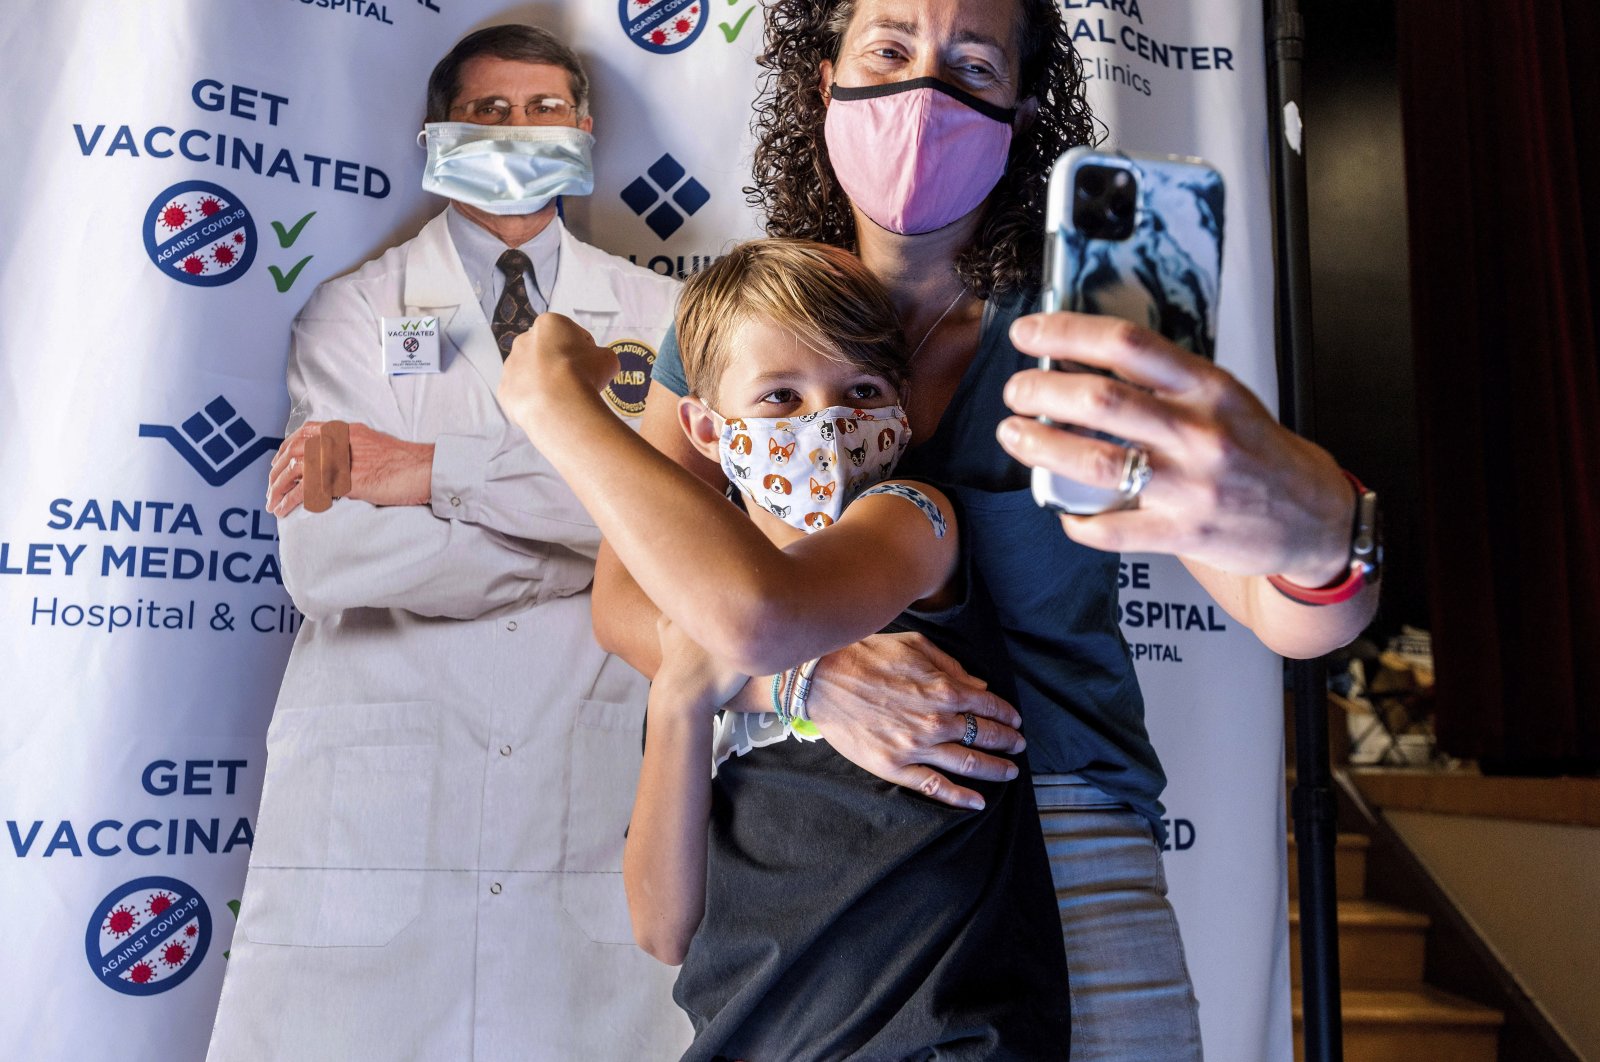 Finn Washburn, 9, shows his vaccination site as his mother, Kate Elsley, takes a photo shortly after he received a Pfizer COVID-19 vaccine in San Jose, California, U.S., on Nov. 3, 2021. (AP Photo)